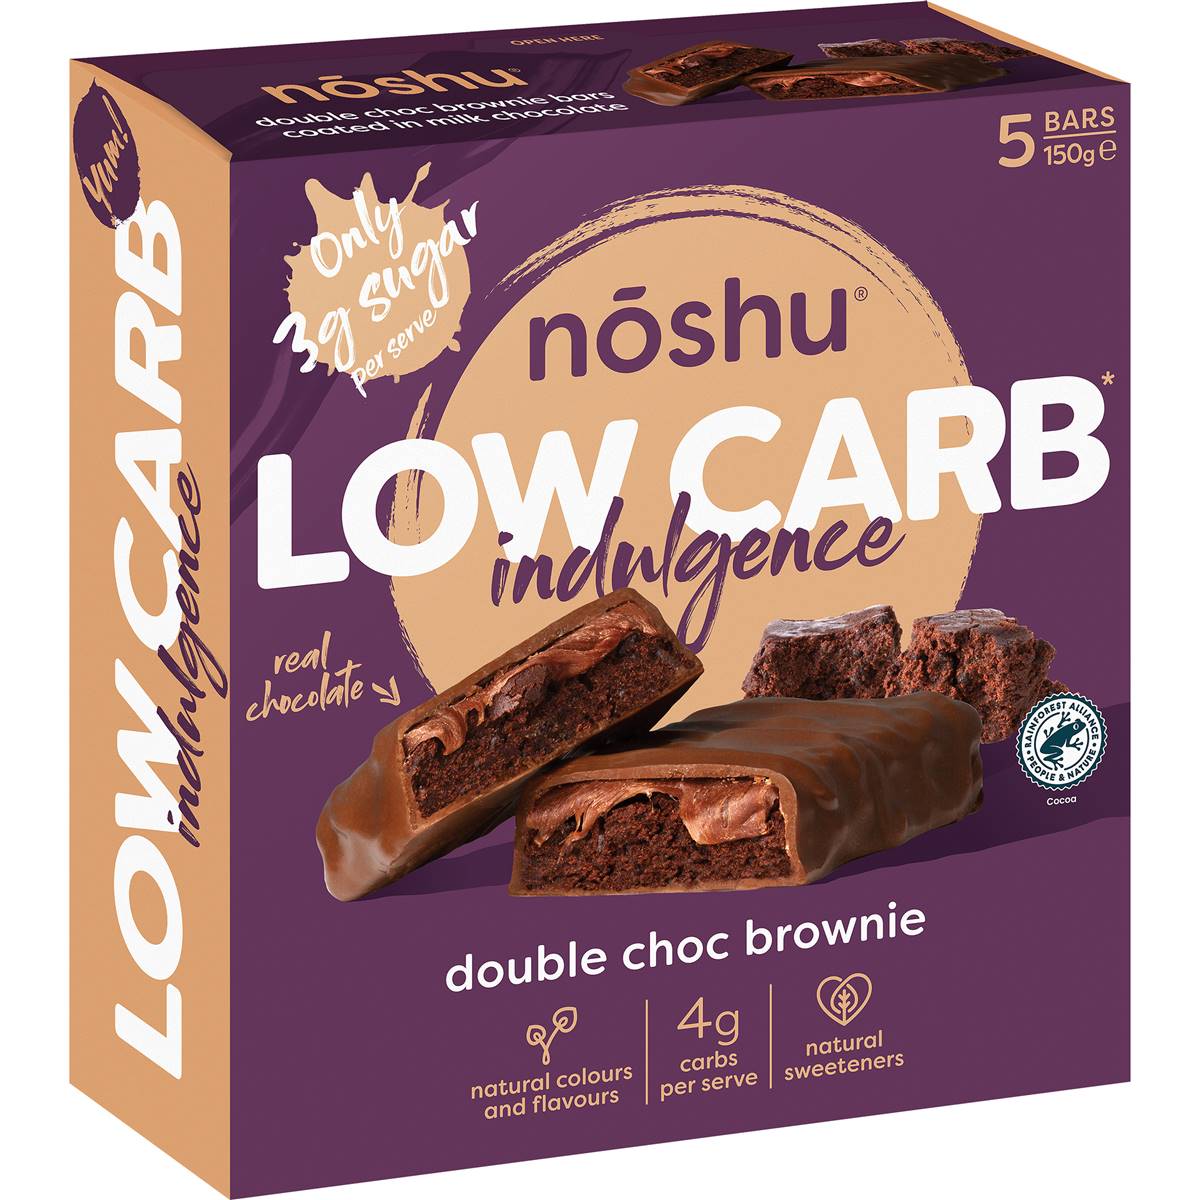 Calories in Noshu Low Carb Indulgence Bars Double Choc Brownie